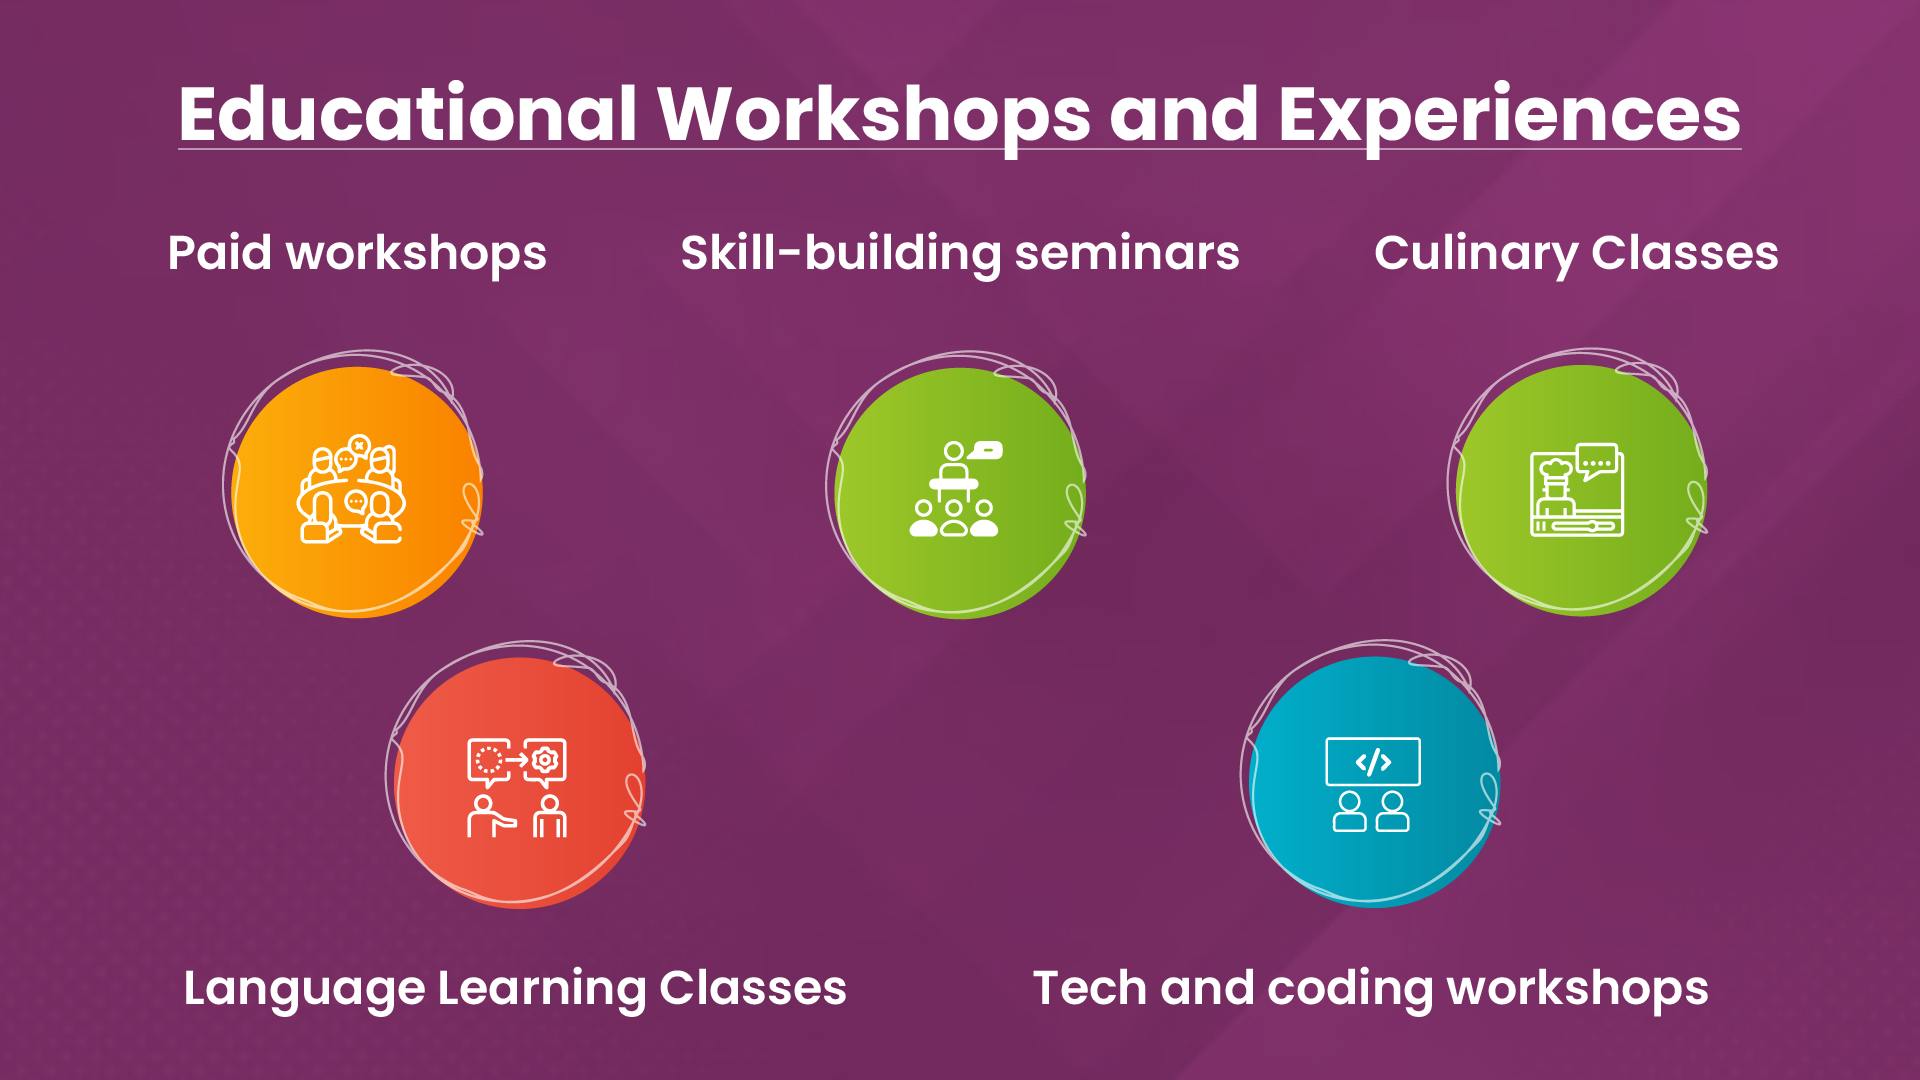 Category 5 - Educational workshops and experiences